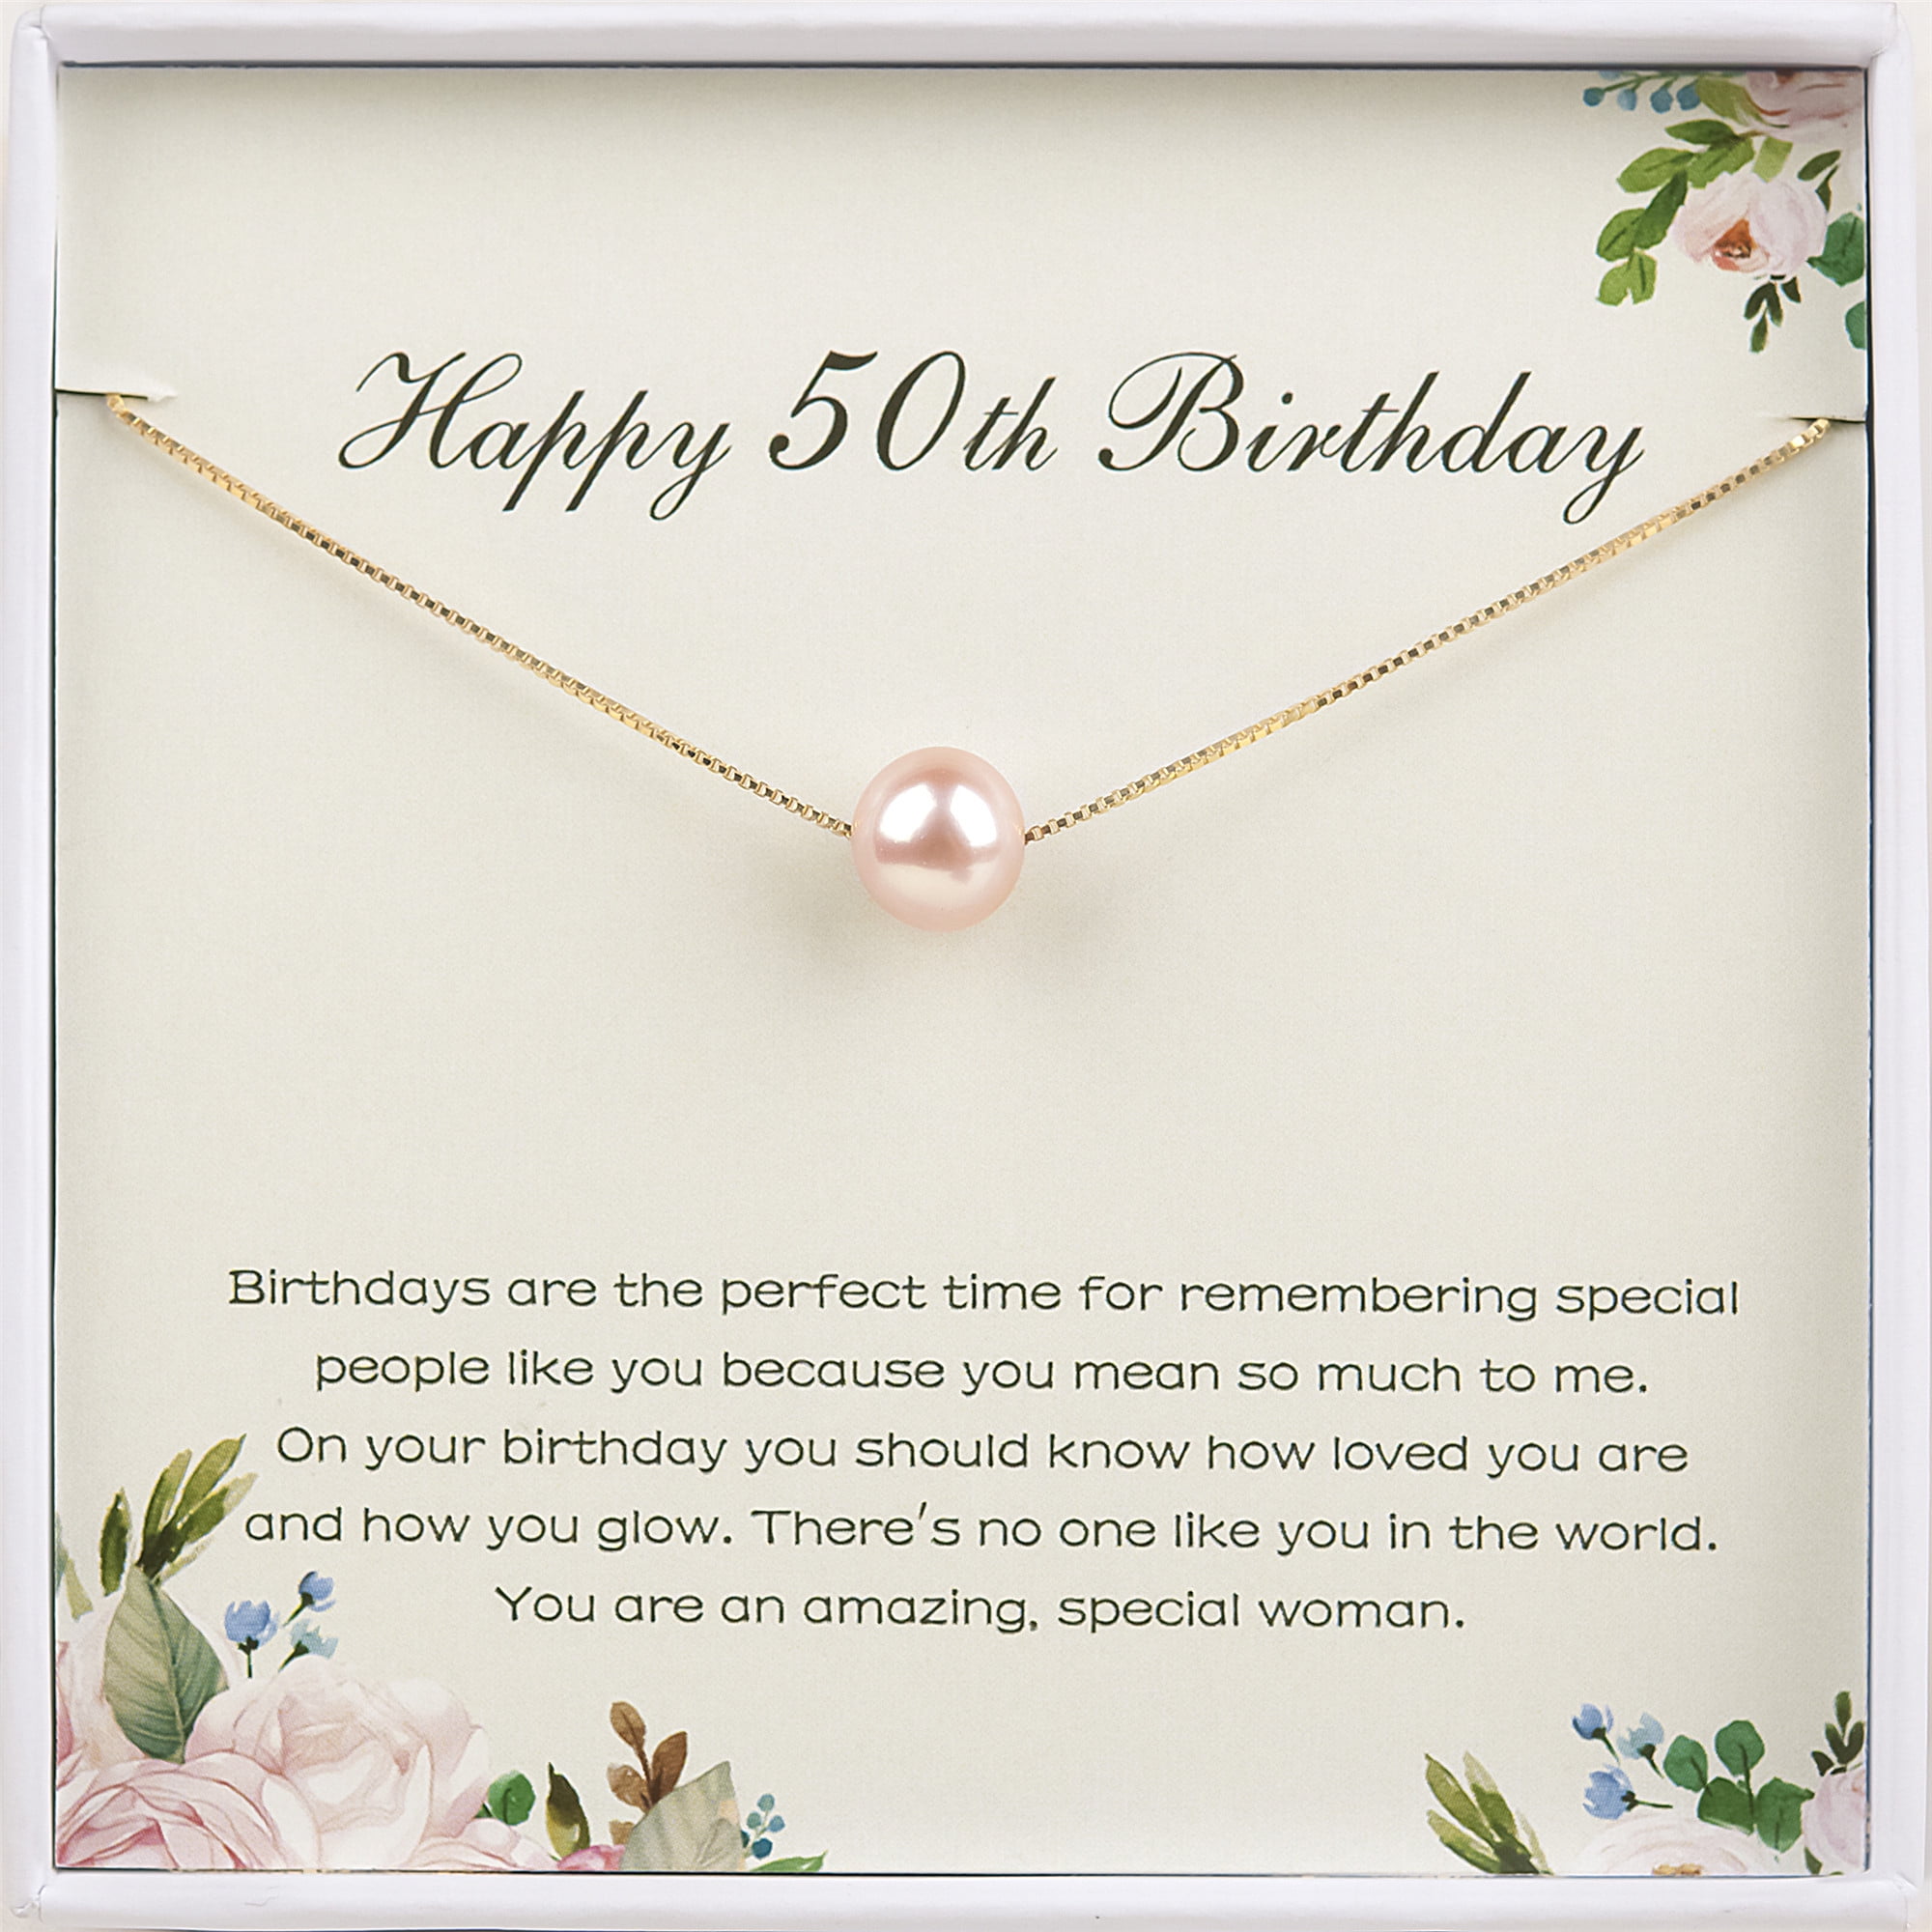 Happy 50th Birthday Gift Box in White with Gold Foil text